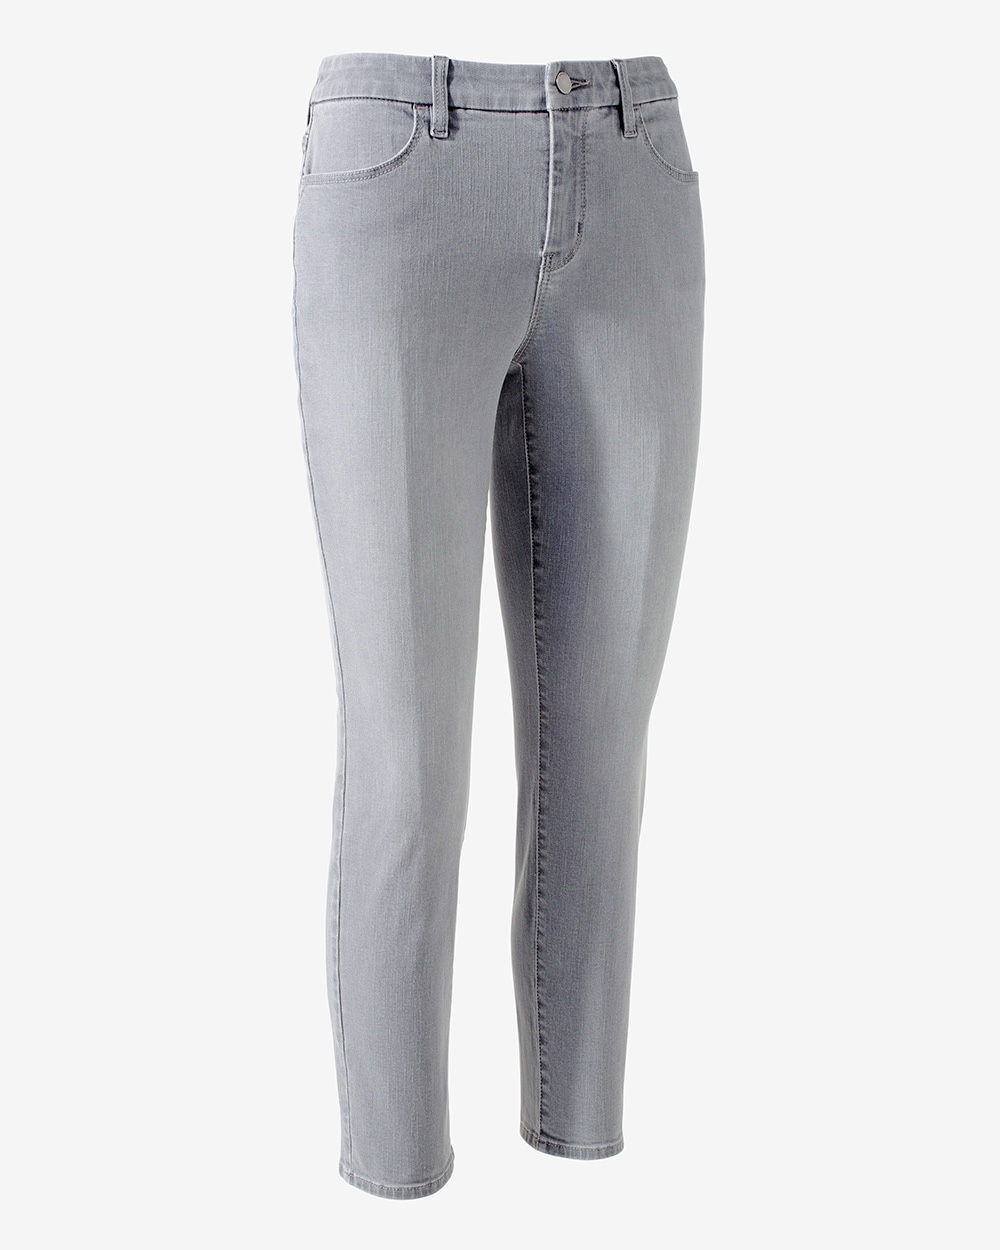 Perfect Stretch Girlfriend Ankle Jeans - Chico's Off The Rack - Chico's  Outlet